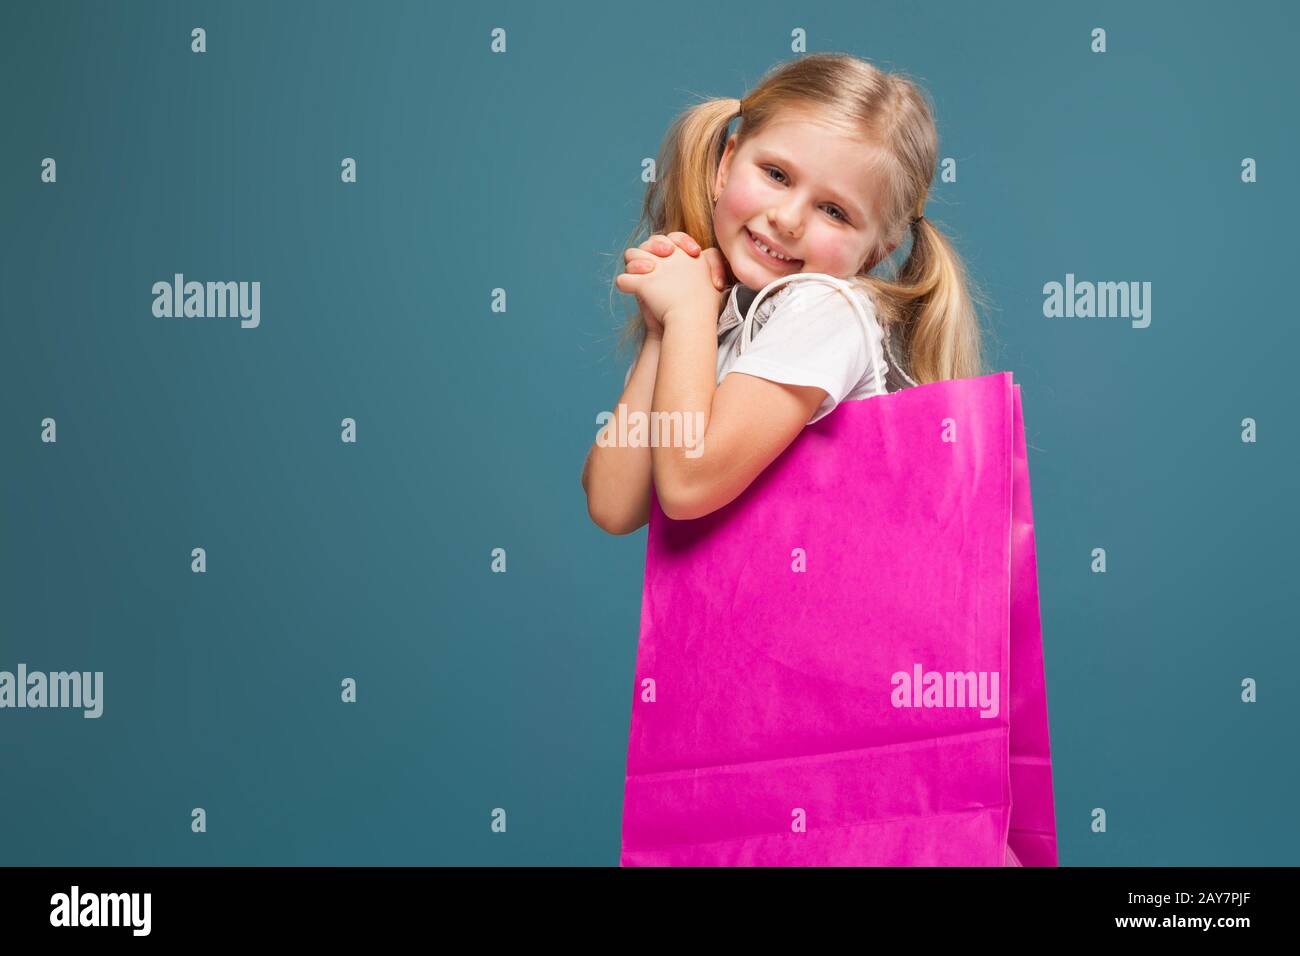 Adorable cute little girl in white shirt, white jacket and white shorts hold purple paper bag Stock Photo